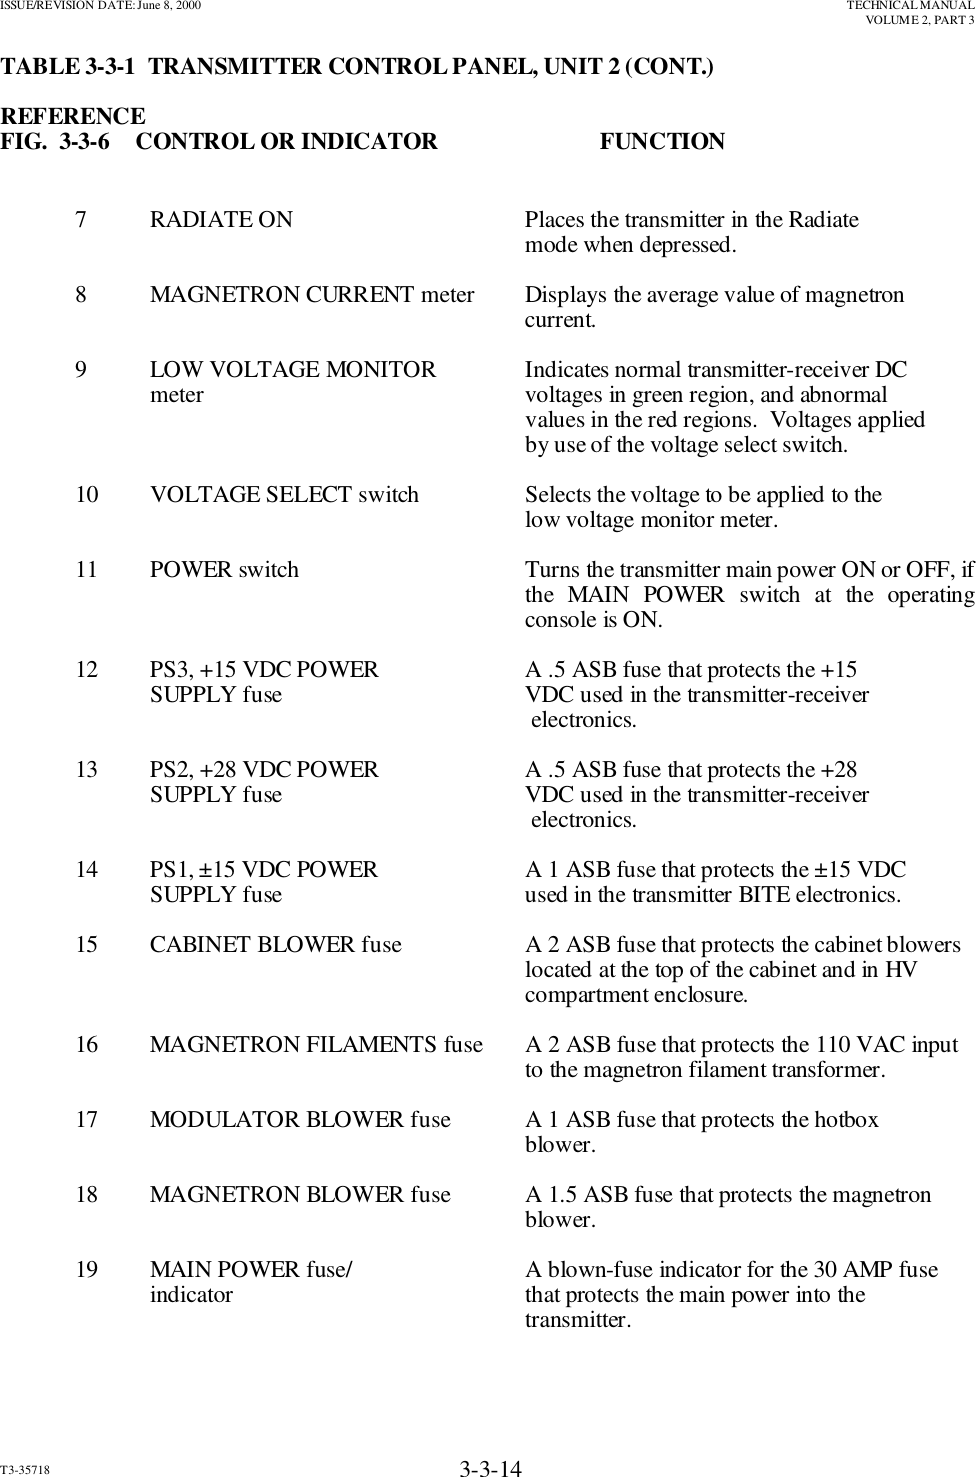 ISSUE/REVISION DATE: June 8, 2000 TECHNICAL MANUALVOLUME 2, PART 3T3-35718 3-3-14TABLE 3-3-1  TRANSMITTER CONTROL PANEL, UNIT 2 (CONT.)REFERENCEFIG.  3-3-6    CONTROL OR INDICATOR FUNCTION    7 RADIATE ON Places the transmitter in the Radiatemode when depressed.    8  MAGNETRON CURRENT meter  Displays the average value of magnetron current.    9  LOW VOLTAGE MONITOR  Indicates normal transmitter-receiver DCmeter voltages in green region, and abnormalvalues in the red regions.  Voltages appliedby use of the voltage select switch.10  VOLTAGE SELECT switch  Selects the voltage to be applied to the low voltage monitor meter.    11  POWER switch  Turns the transmitter main power ON or OFF, ifthe MAIN POWER switch at the operatingconsole is ON.    12 PS3, +15 VDC POWER  A .5 ASB fuse that protects the +15SUPPLY fuse  VDC used in the transmitter-receiver electronics.13 PS2, +28 VDC POWER  A .5 ASB fuse that protects the +28SUPPLY fuse  VDC used in the transmitter-receiver electronics.14  PS1, ±15 VDC POWER A 1 ASB fuse that protects the ±15 VDCSUPPLY fuse  used in the transmitter BITE electronics.15  CABINET BLOWER fuse  A 2 ASB fuse that protects the cabinet blowers located at the top of the cabinet and in HV compartment enclosure.16  MAGNETRON FILAMENTS fuse  A 2 ASB fuse that protects the 110 VAC input to the magnetron filament transformer.17 MODULATOR BLOWER fuse A 1 ASB fuse that protects the hotboxblower.18 MAGNETRON BLOWER fuse A 1.5 ASB fuse that protects the magnetron blower.    19 MAIN POWER fuse/ A blown-fuse indicator for the 30 AMP fuse indicator that protects the main power into thetransmitter.